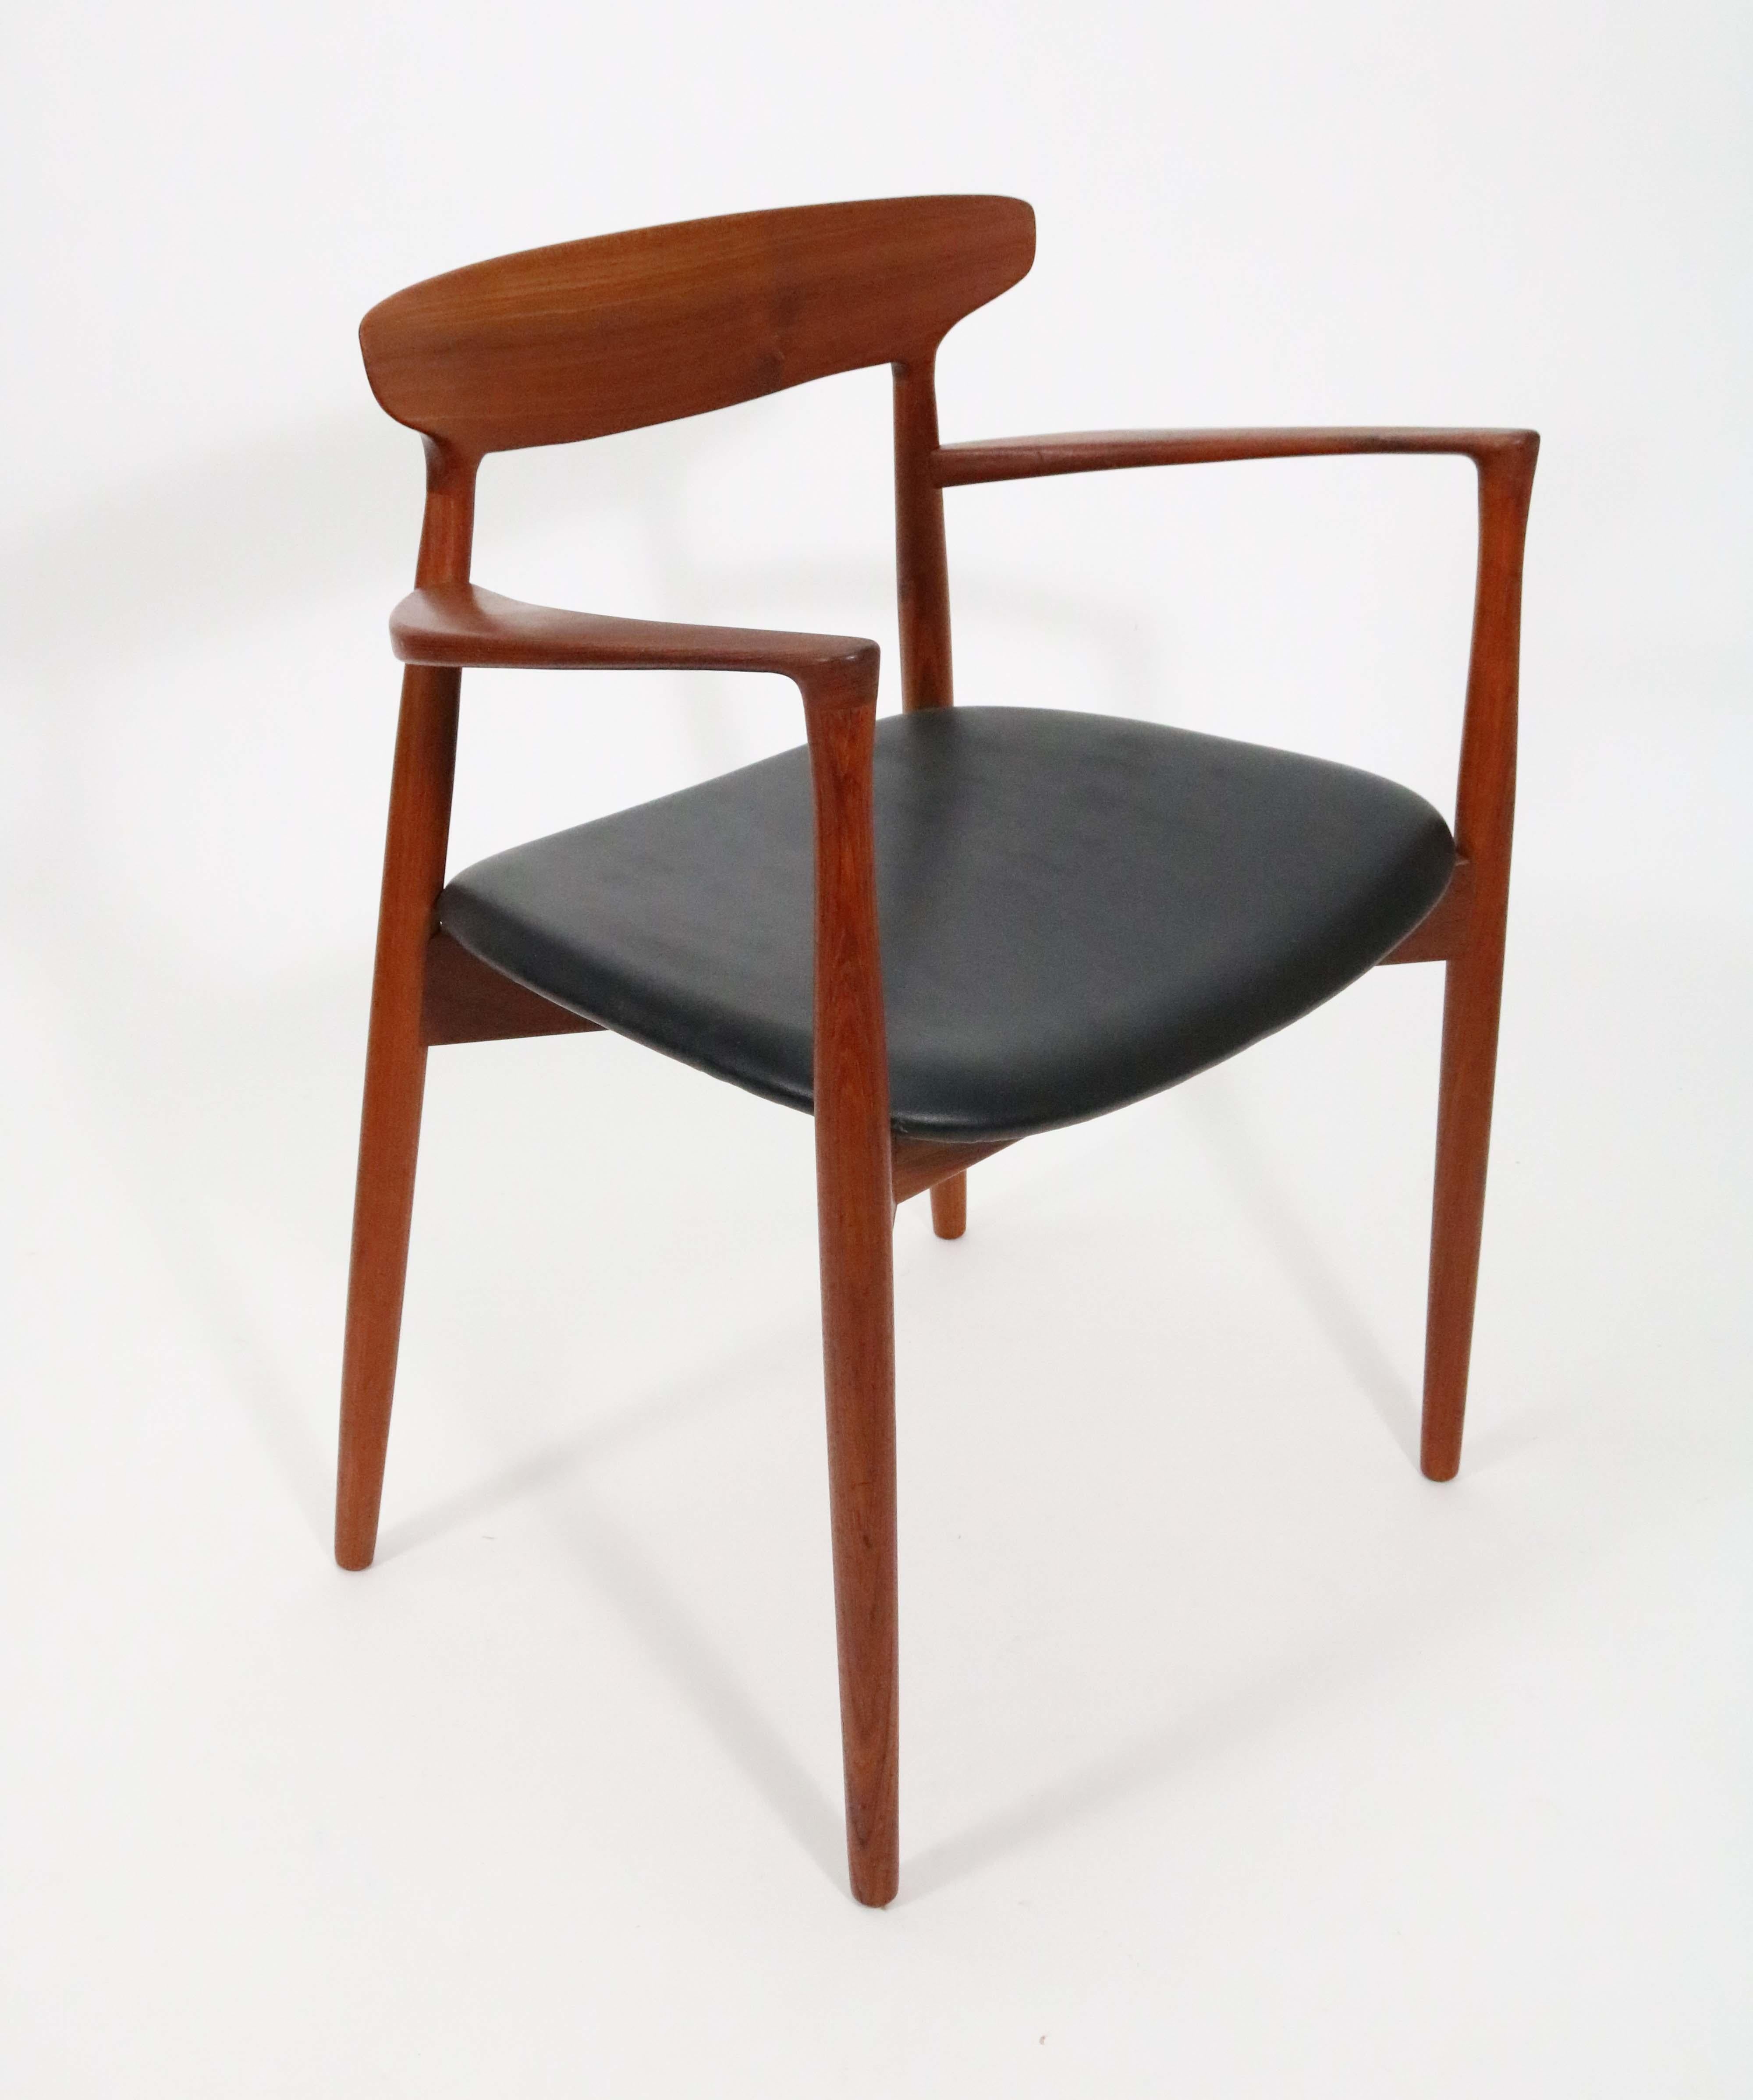 A handsome set of 4 dining chairs, 1 arm and 3 side chairs, by Harry Østergaard for Randers Mobelfabrik

True Scandinavian Modern elegance and modesty, featuring a graceful organically-designed backrest. 

Beautifully-grained solid teak with